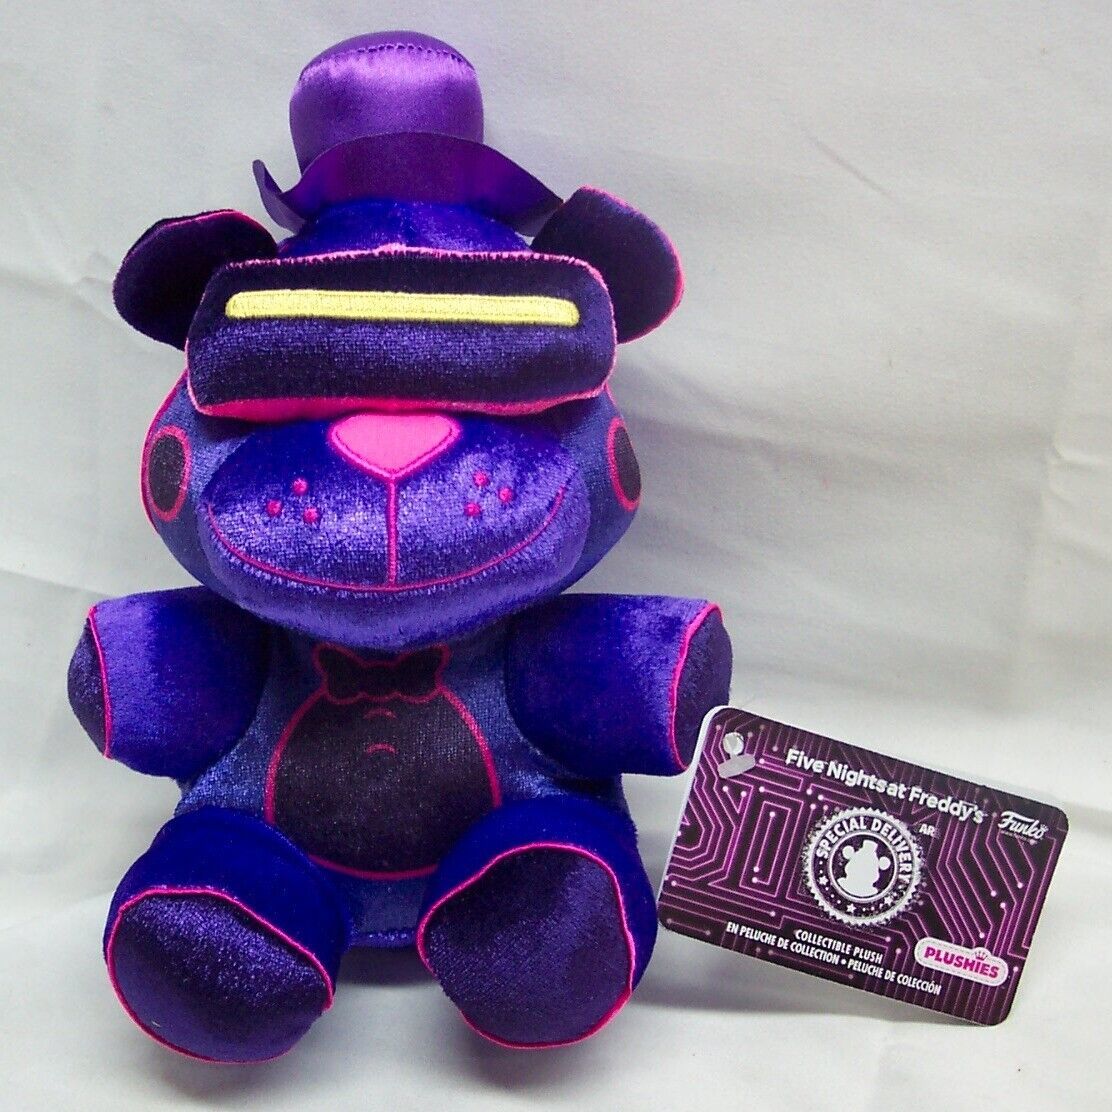 Five Nights at Freddys SPECIAL DELIVERY VR PURPLE BEAR 8" Plush STUFFED Toy NEW - $19.80